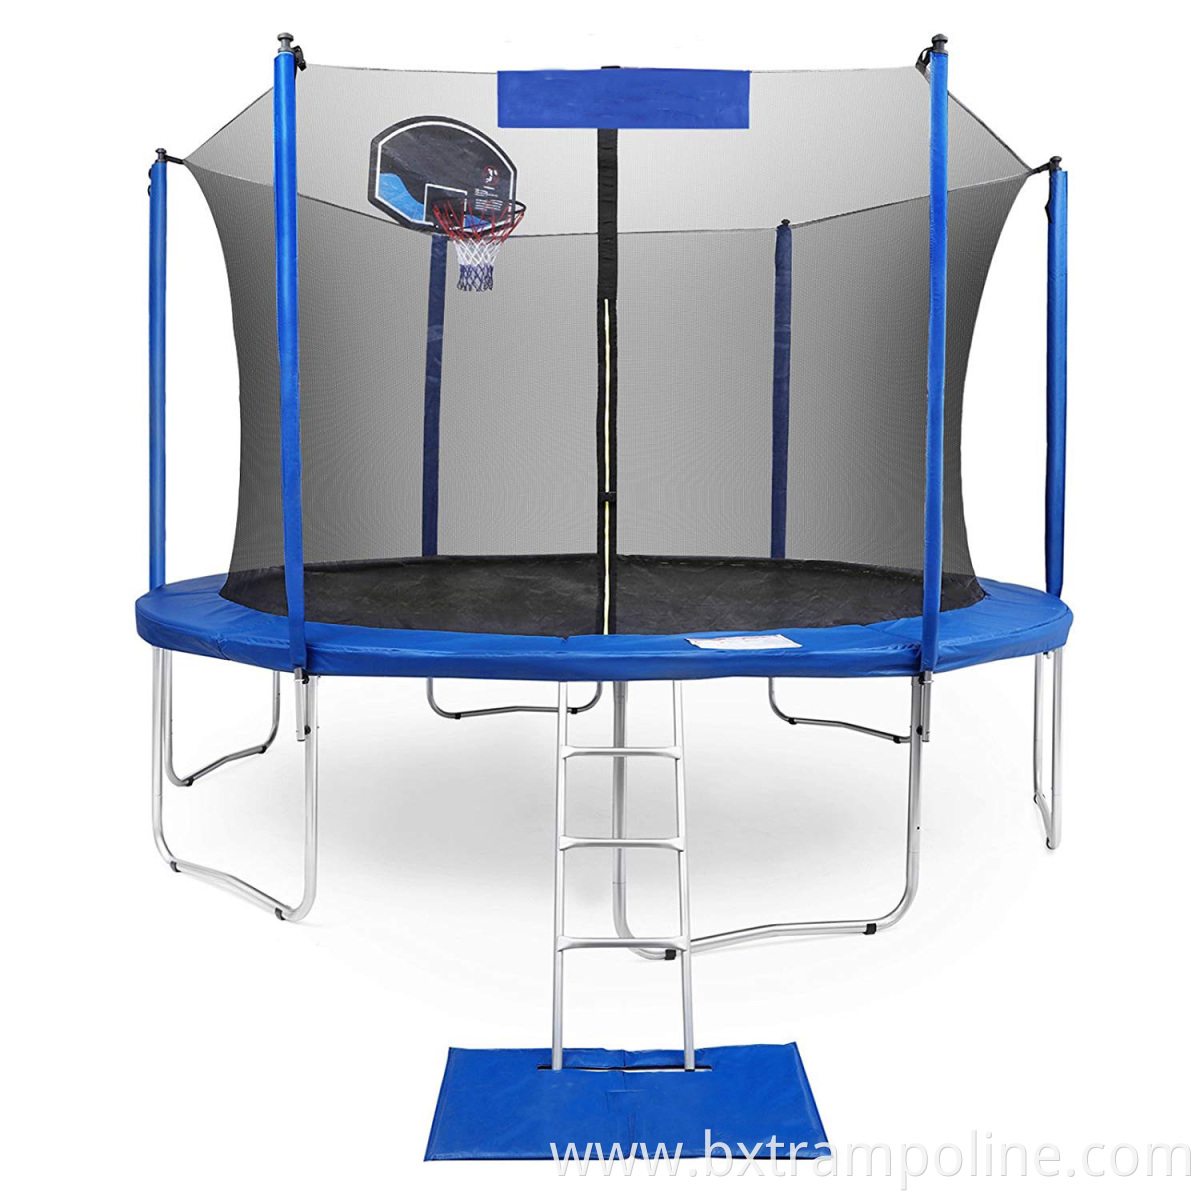 Inground Outdoor Trampoline with Enclosures for sale, Trampoline Park 10FT 12FT 14FT 15FT, bungee run trampoline for sale